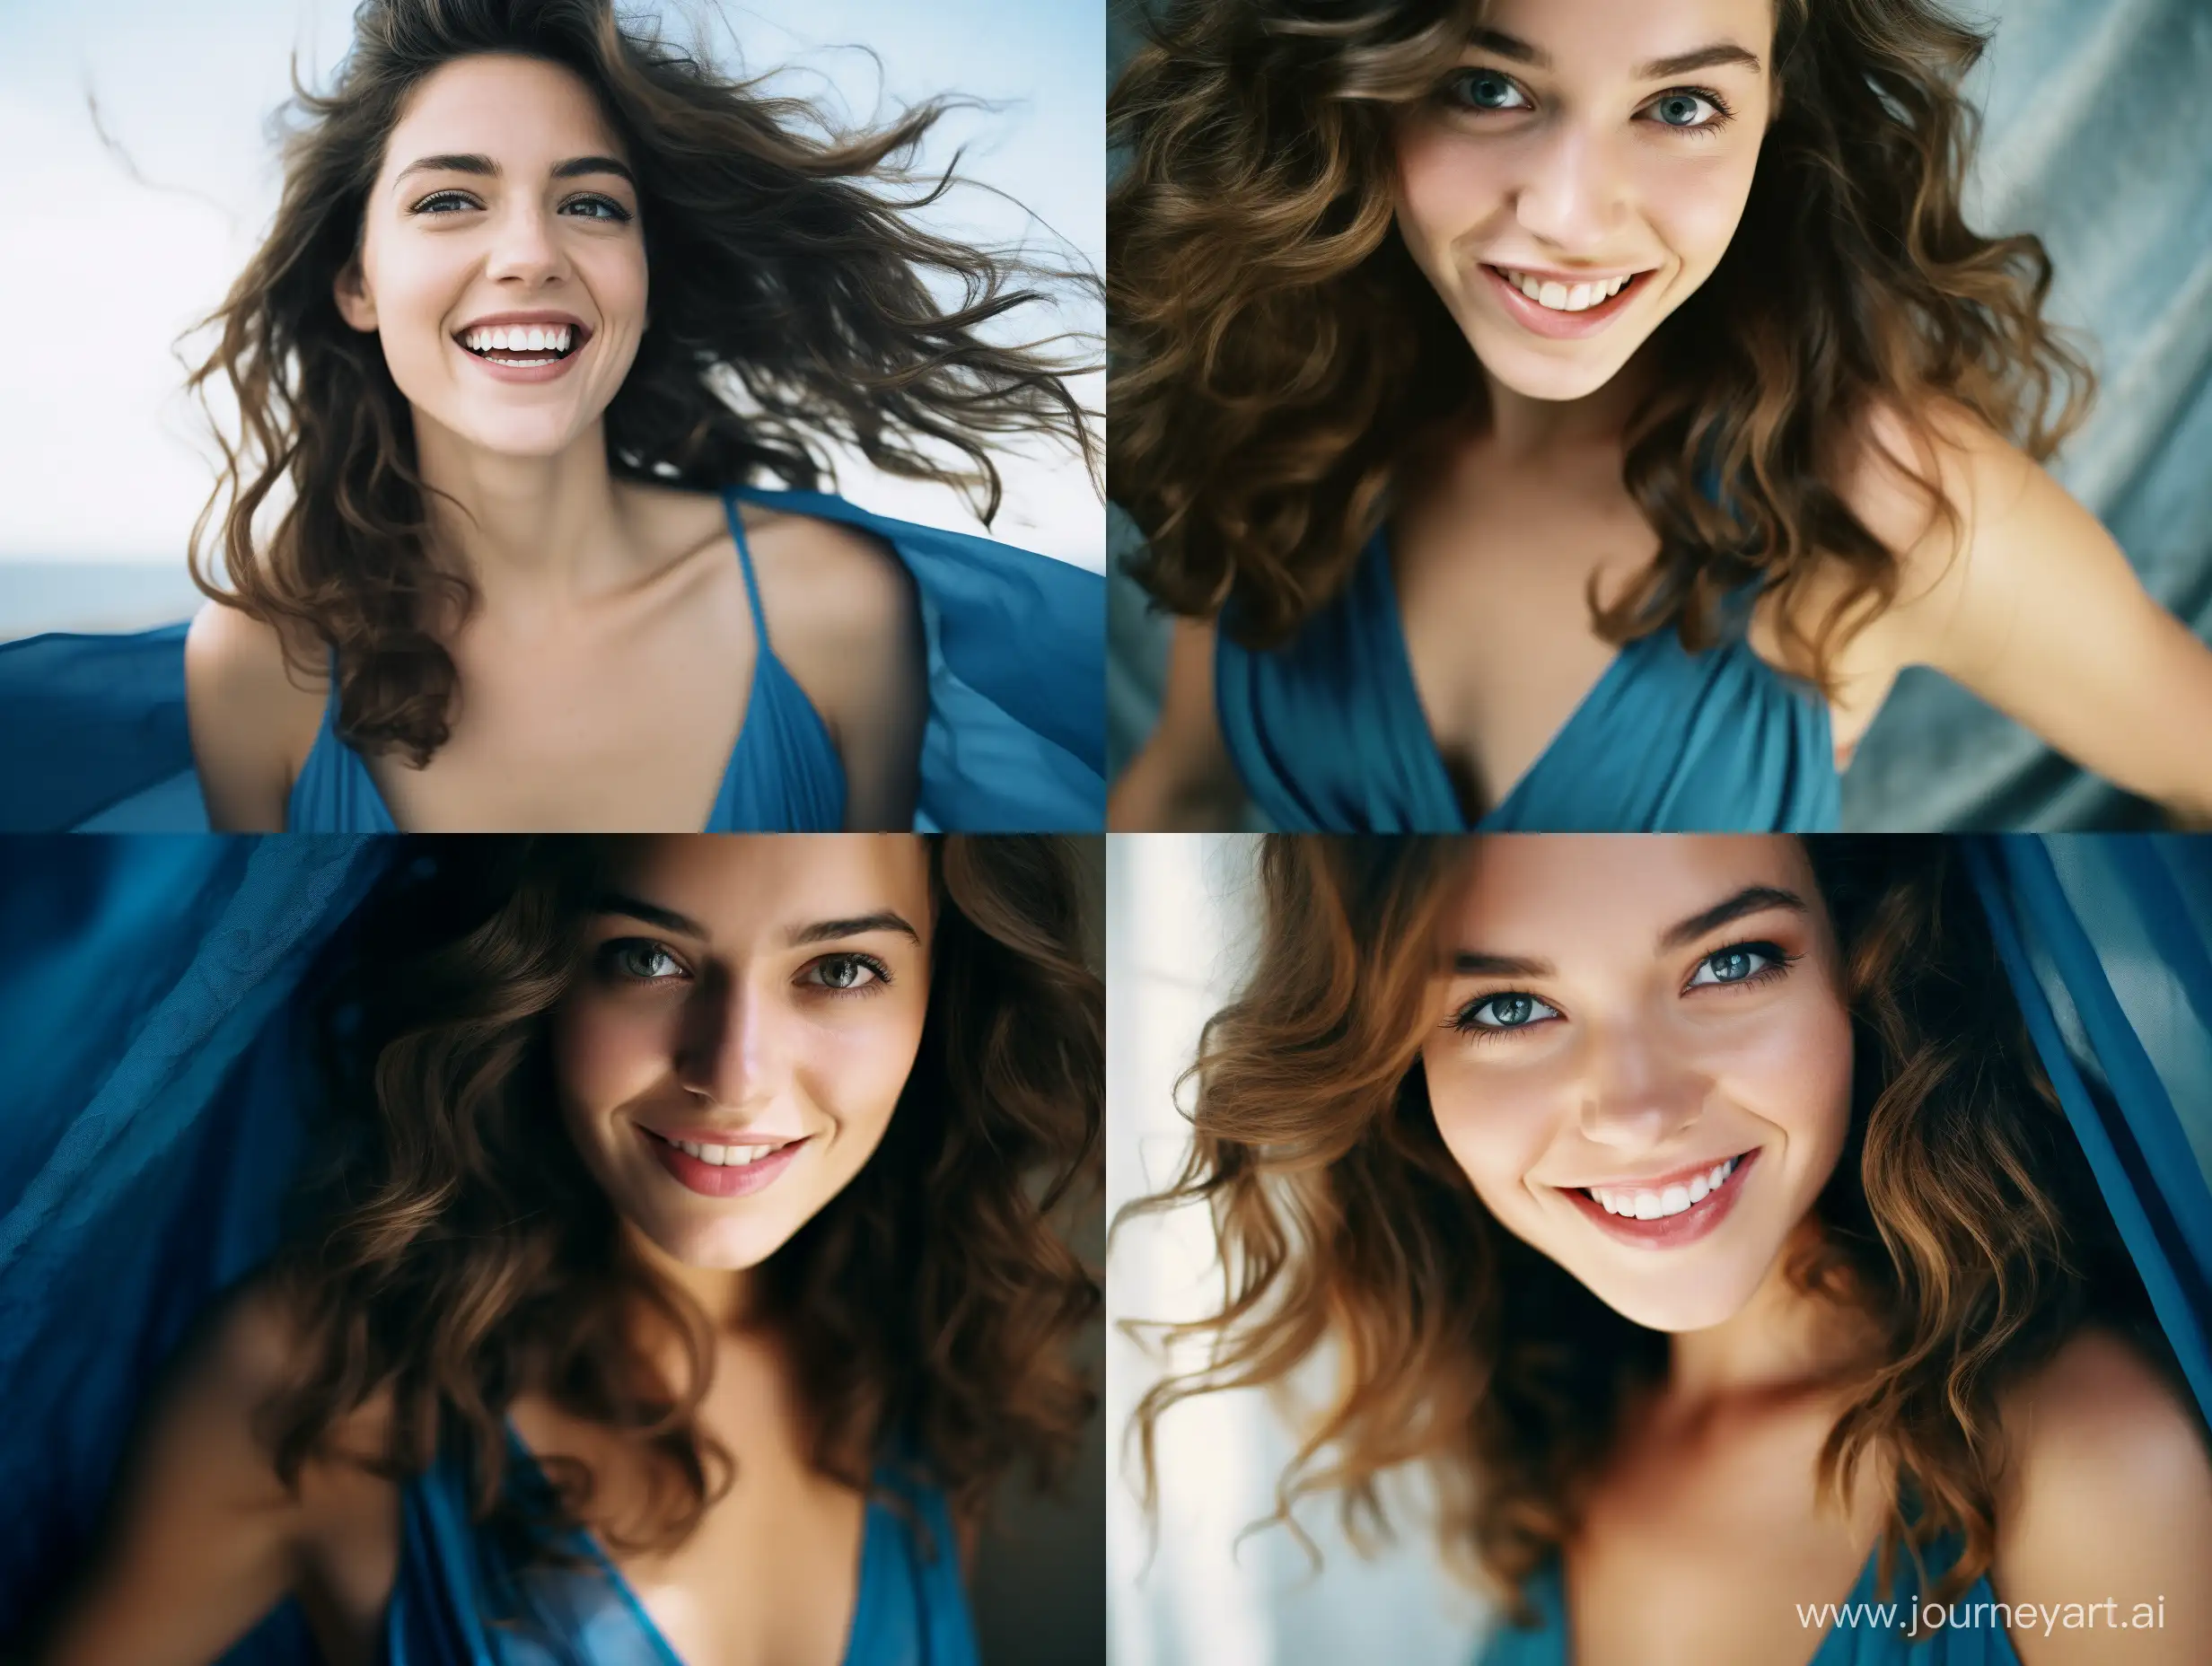 analog photo, closeup three-quarters pose, 25 year old caucasian woman with wavy brown hair and wearing a blue dress, focus on her eyes. She is smiling because she have just tried contact lenses and surprised how crisp and clear the world is.